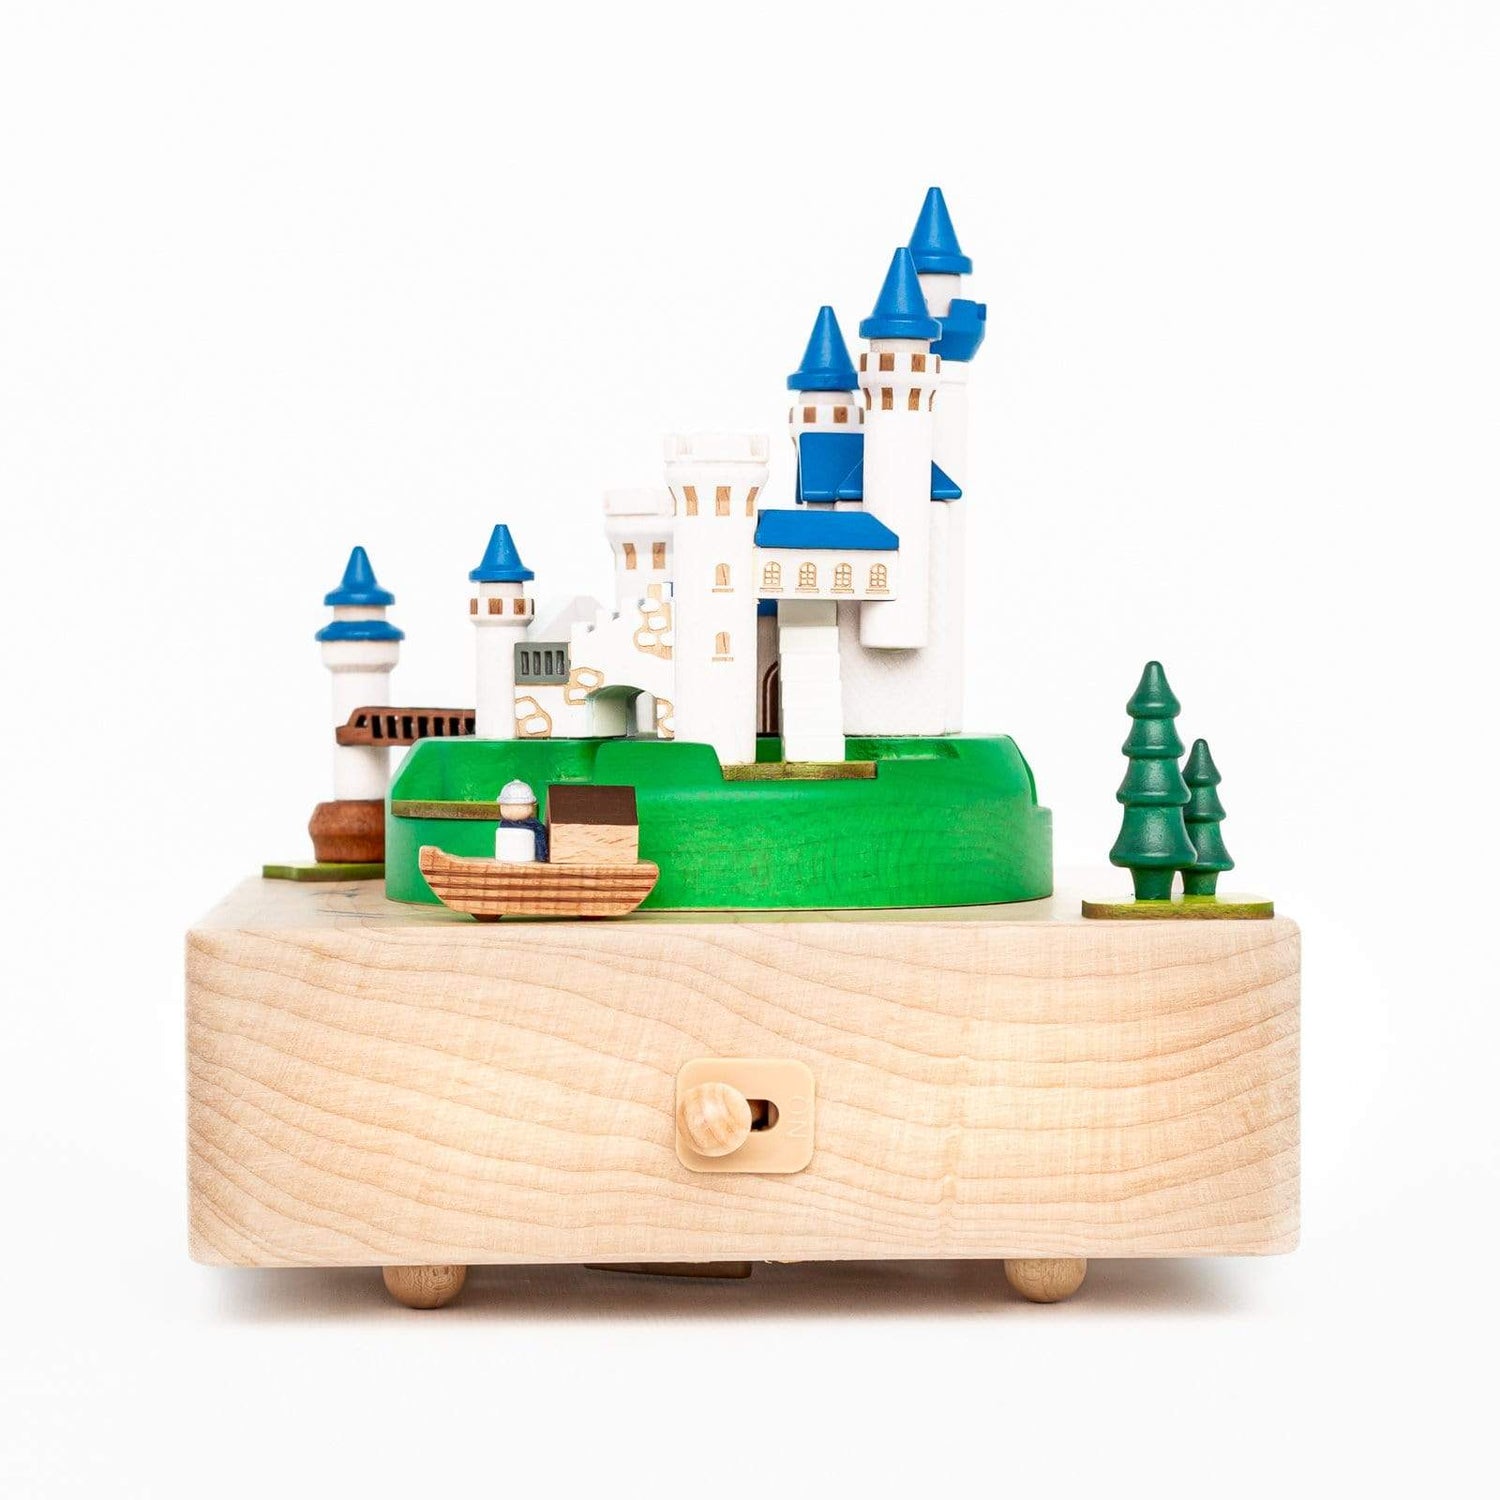 Wooderful Life Music Boxes Wooden Forest Castle Music Box